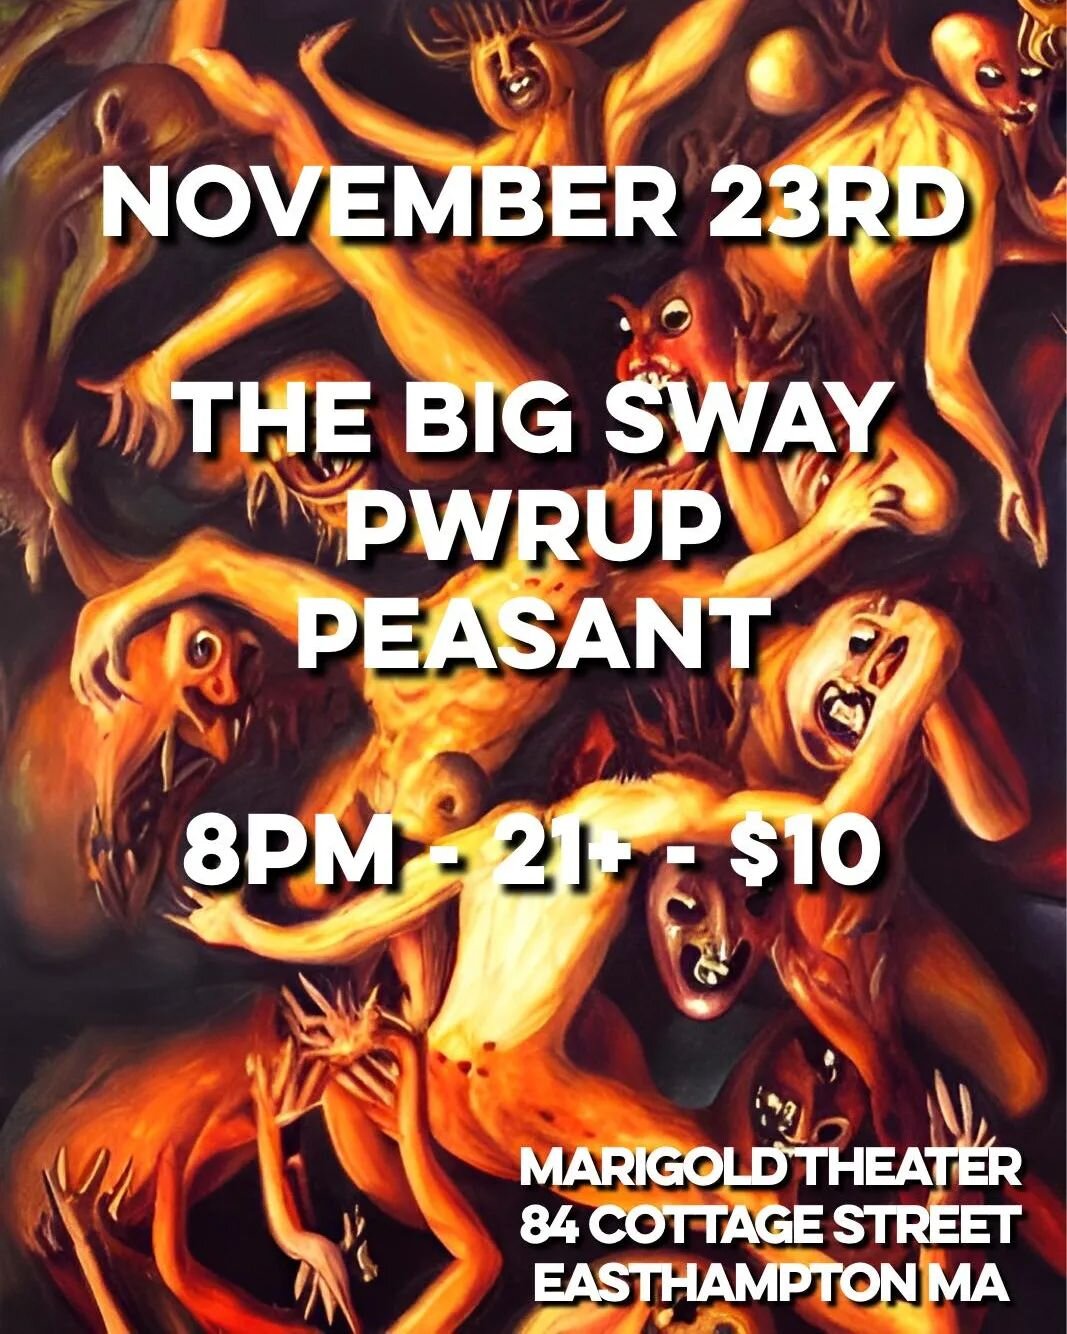 ⚡️We have news! Our hometown album release show is Wed, Nov 23rd at @marigoldtheater with good buddies @pwrupband and @peasant_ct ... This show is set to be an absolute party, so please come celebrate our new album 'We Made This For You' with us the 